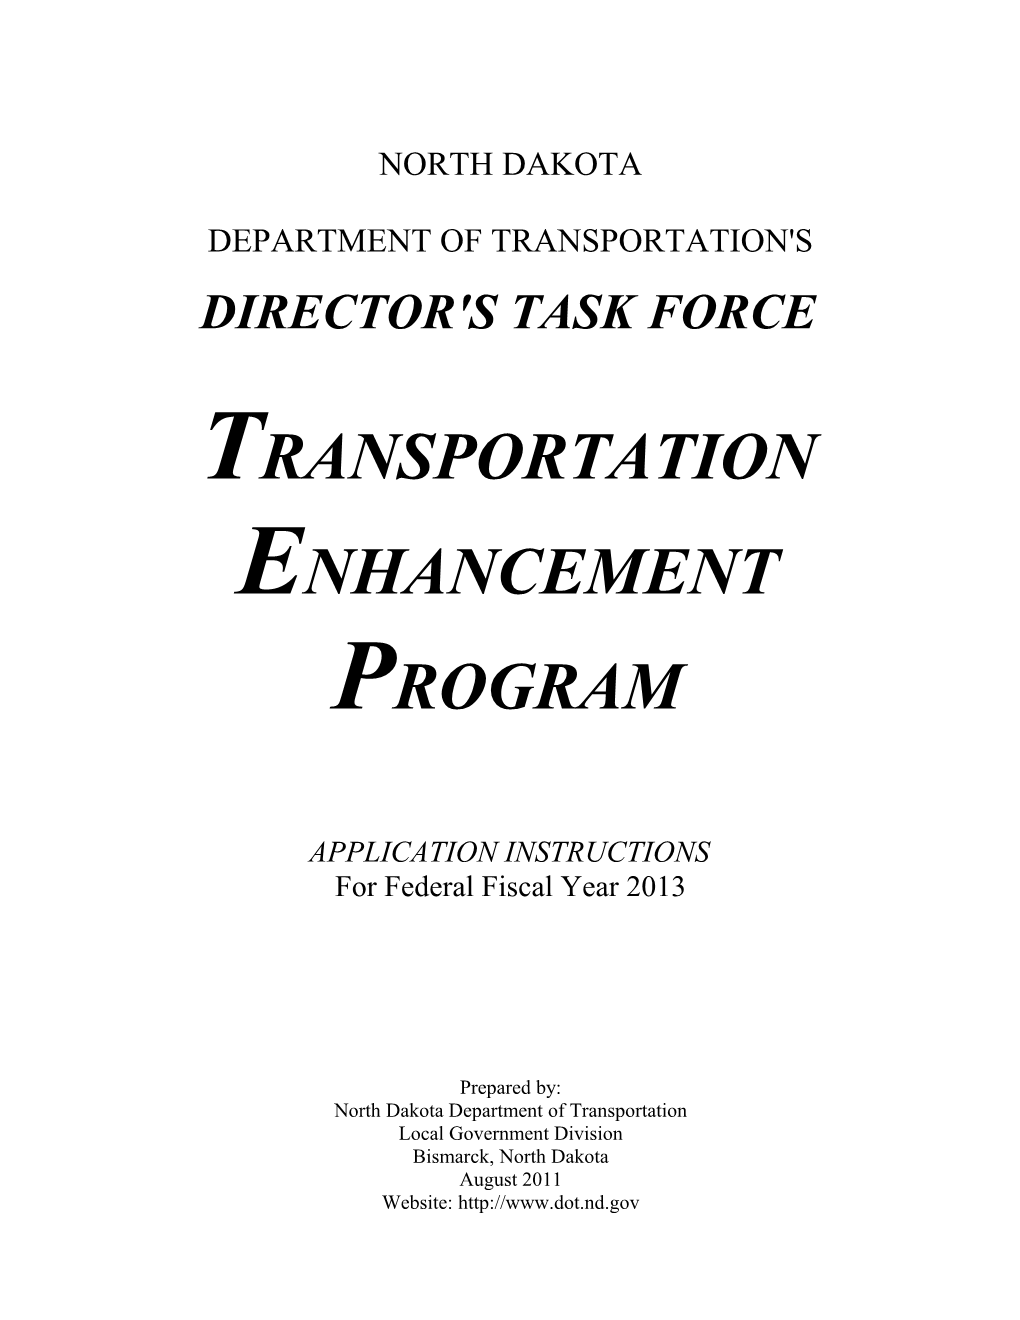 Director's Task Force